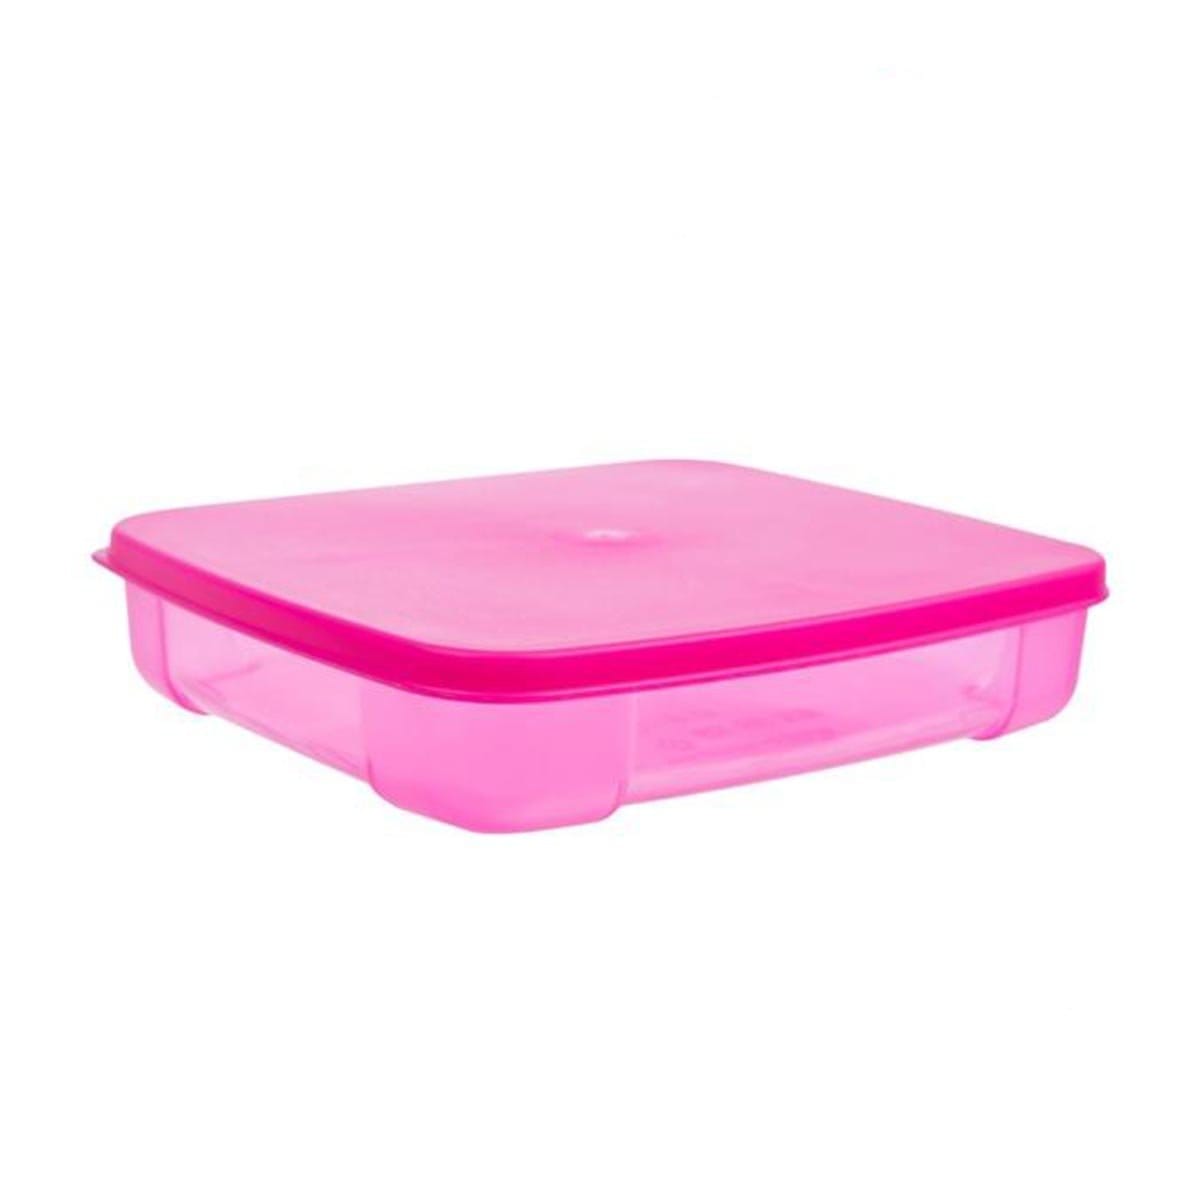 0101 Food Container 0.6L